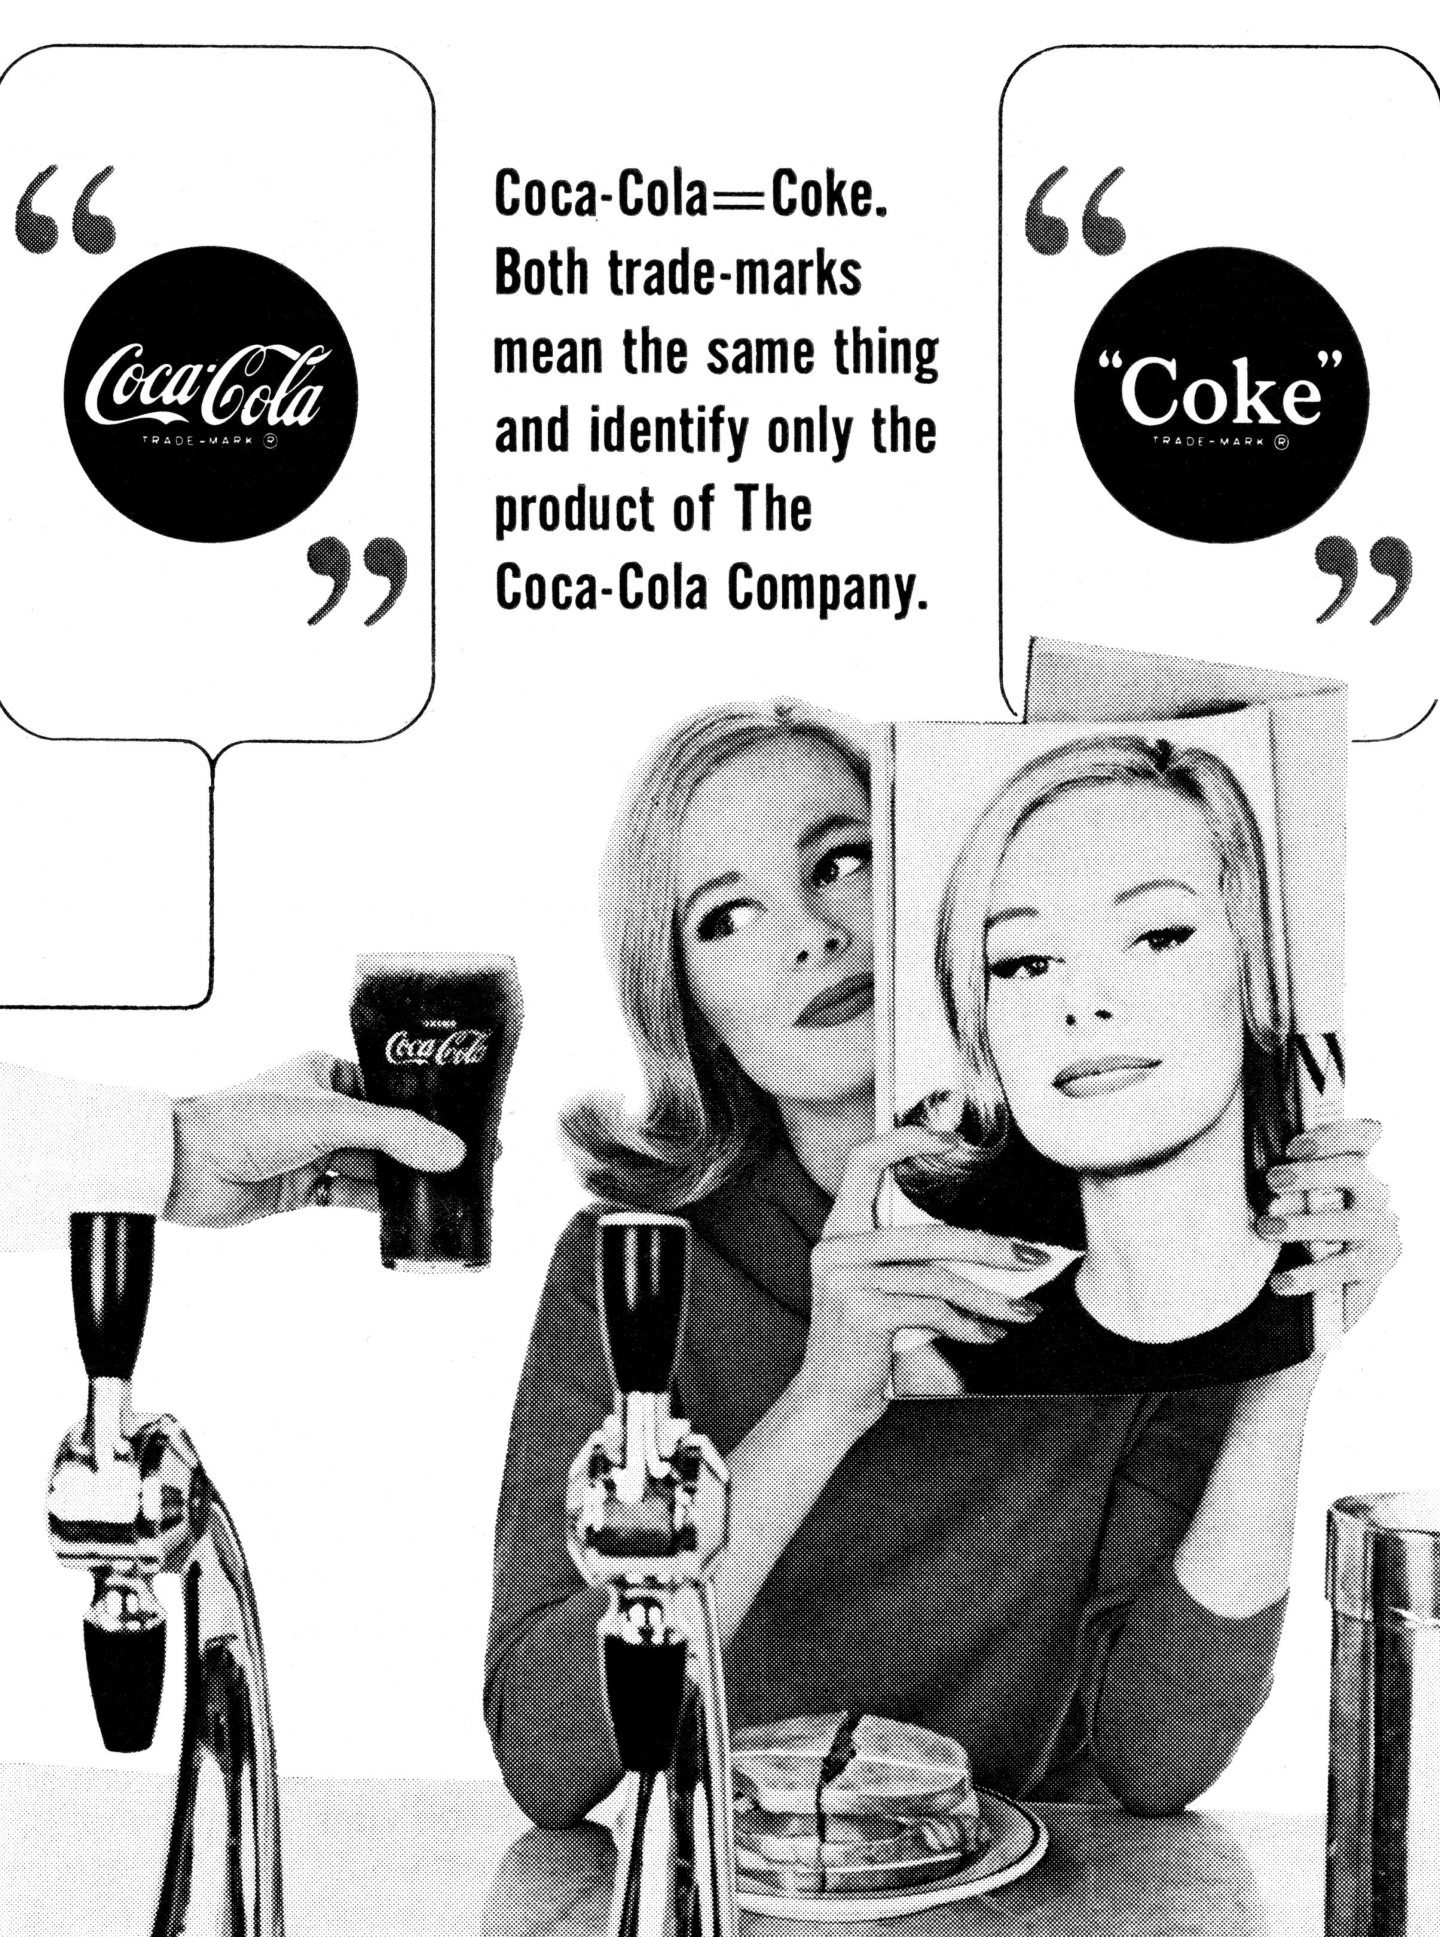 An old Coke ad featuring a young woman and detailing how Coca-Cola and Coke are both trademarks.